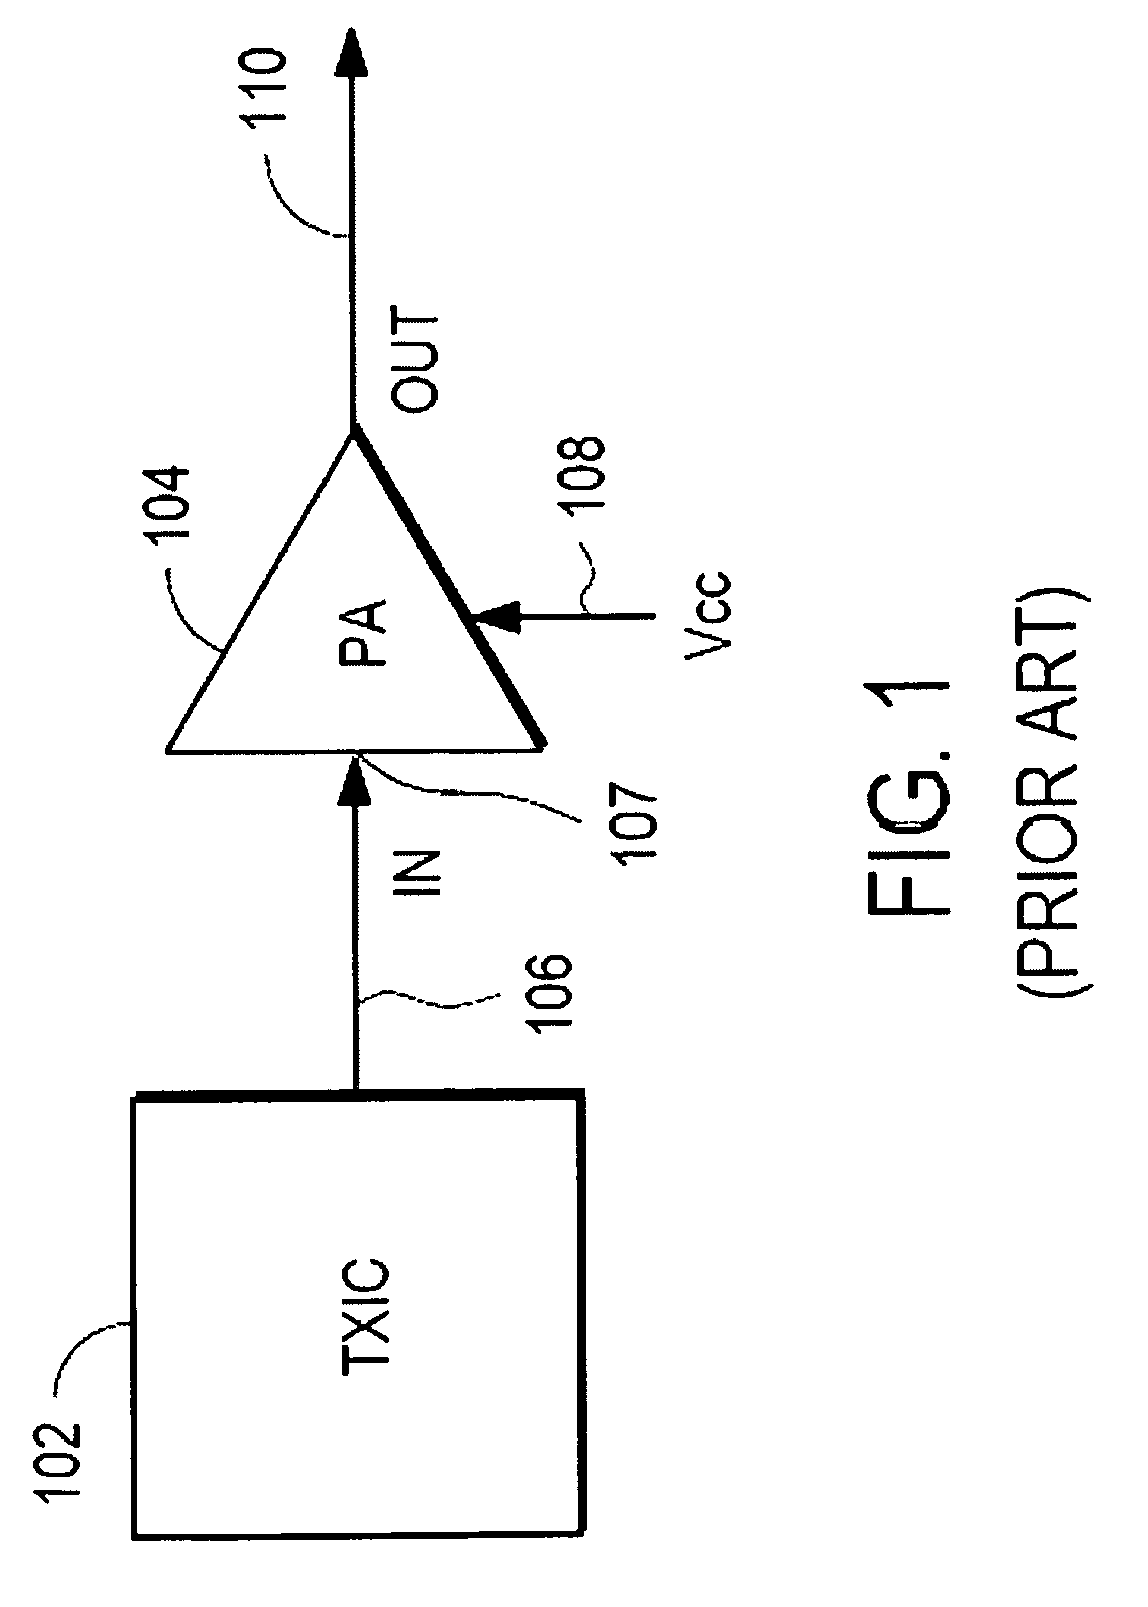 RF power amplifier system with impedance modulation